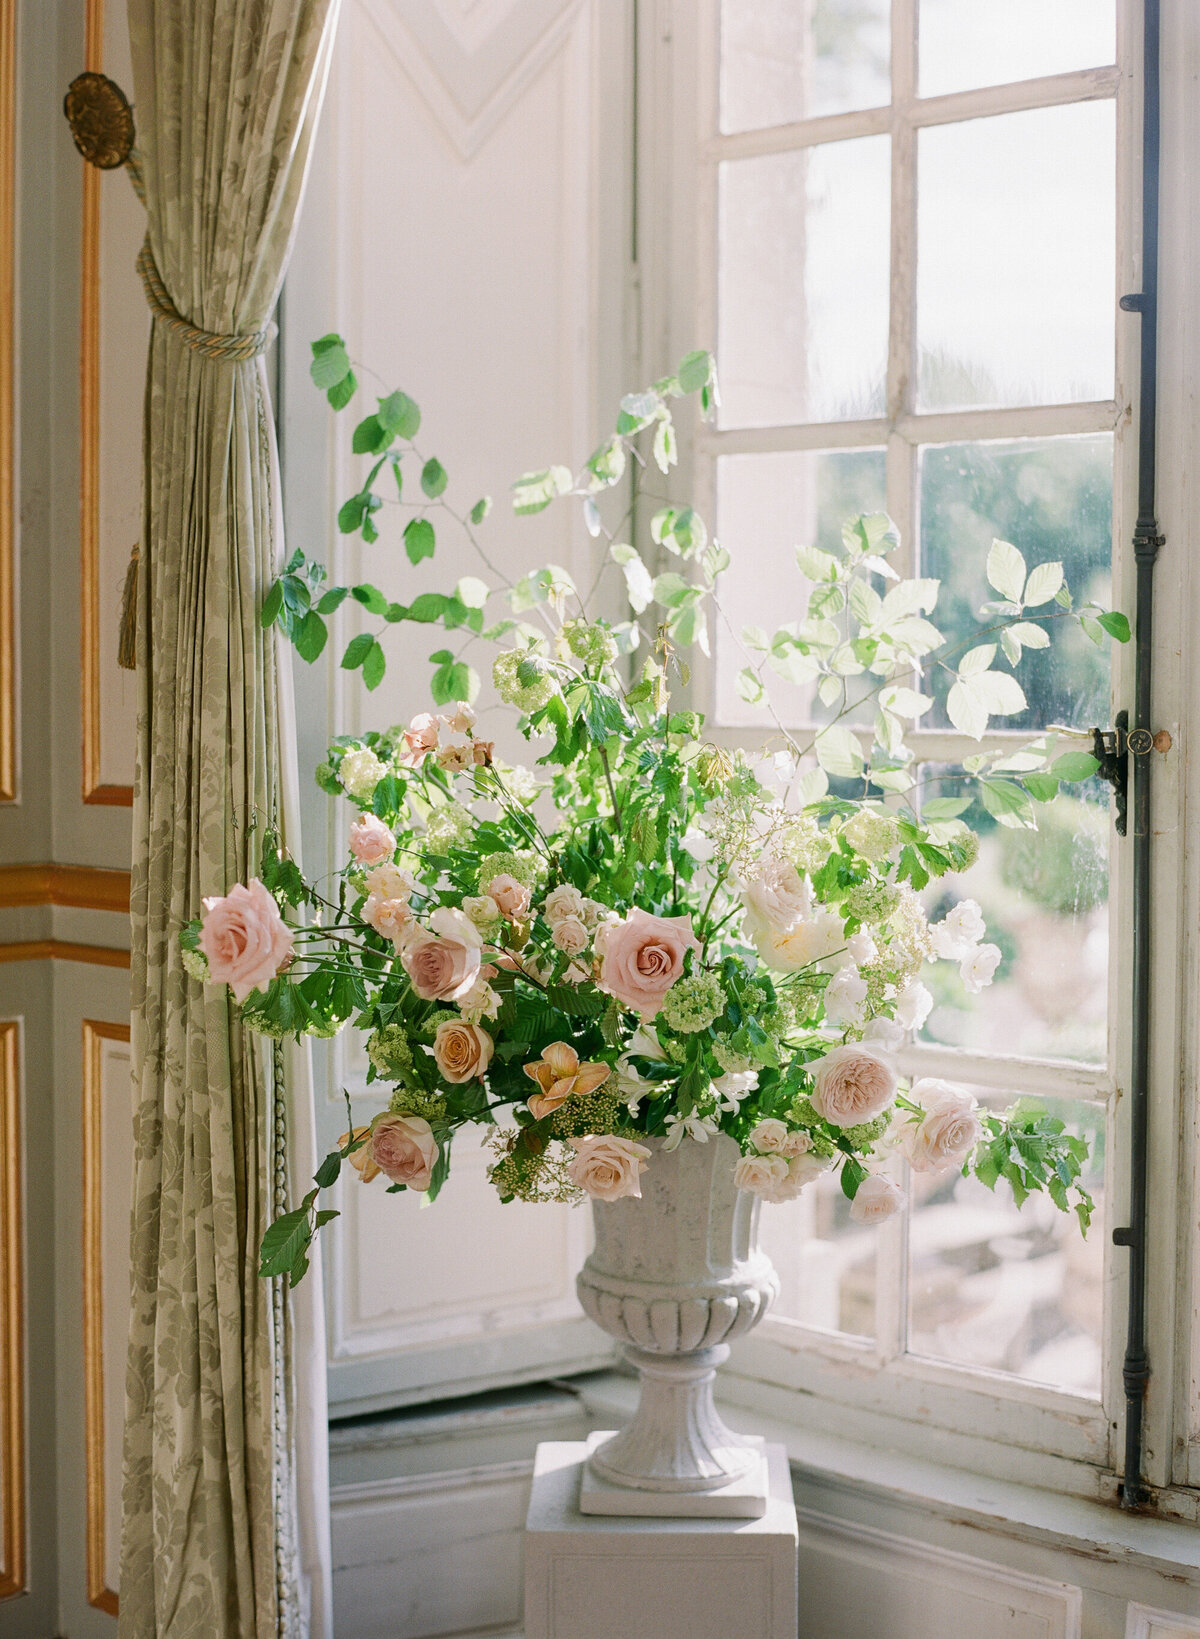 Jennifer Fox Weddings English speaking wedding planning & design agency in France crafting refined and bespoke weddings and celebrations Provence, Paris and destination Laurel-Chris-Chateau-de-Champlatreaux-Molly-Carr-Photography-86